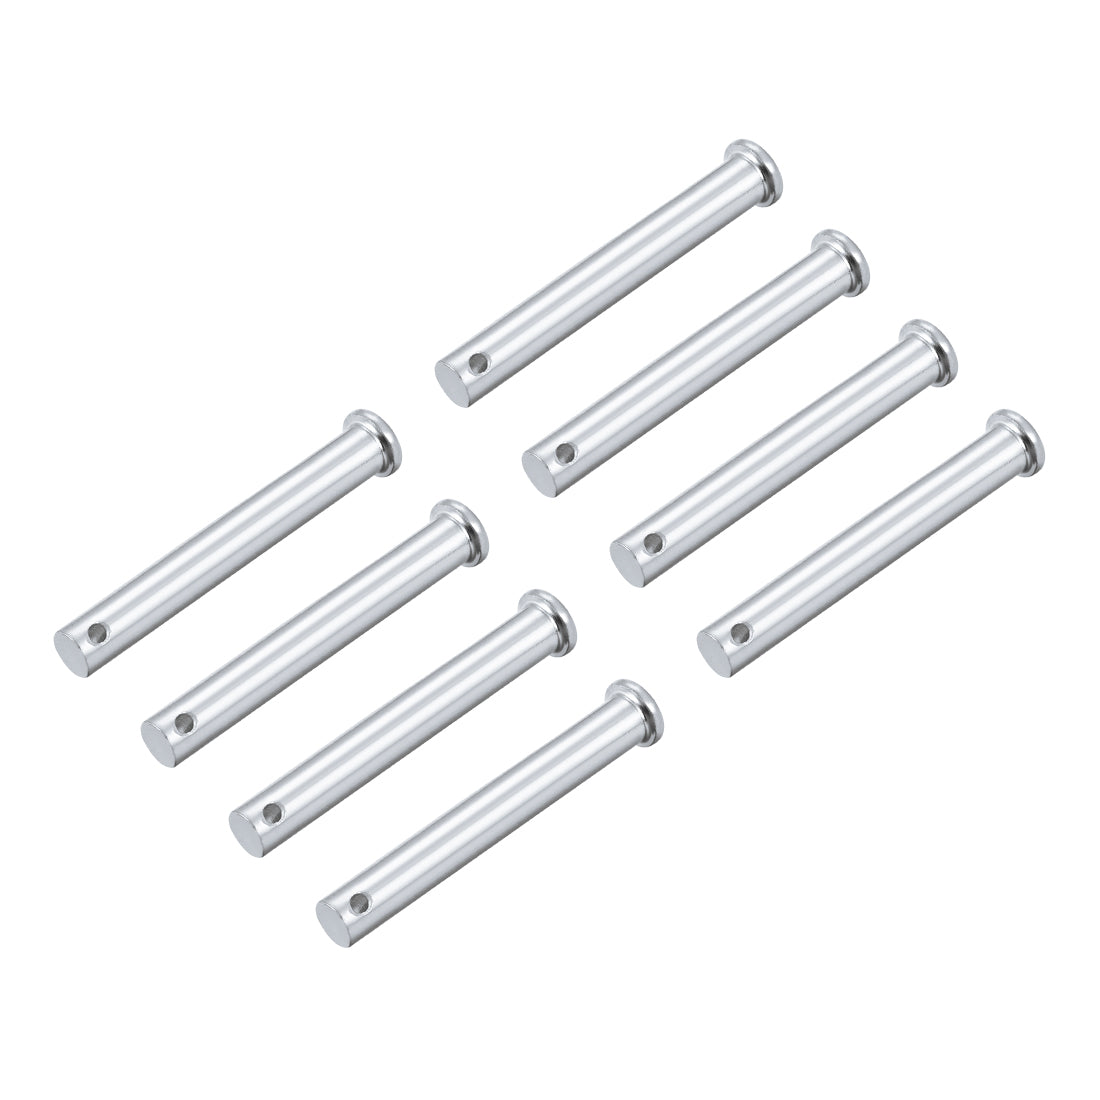 uxcell Uxcell Single Hole Clevis Pins -  Flat Head Zinc-Plating Solid Steel Link Hinge Pin 8Pcs